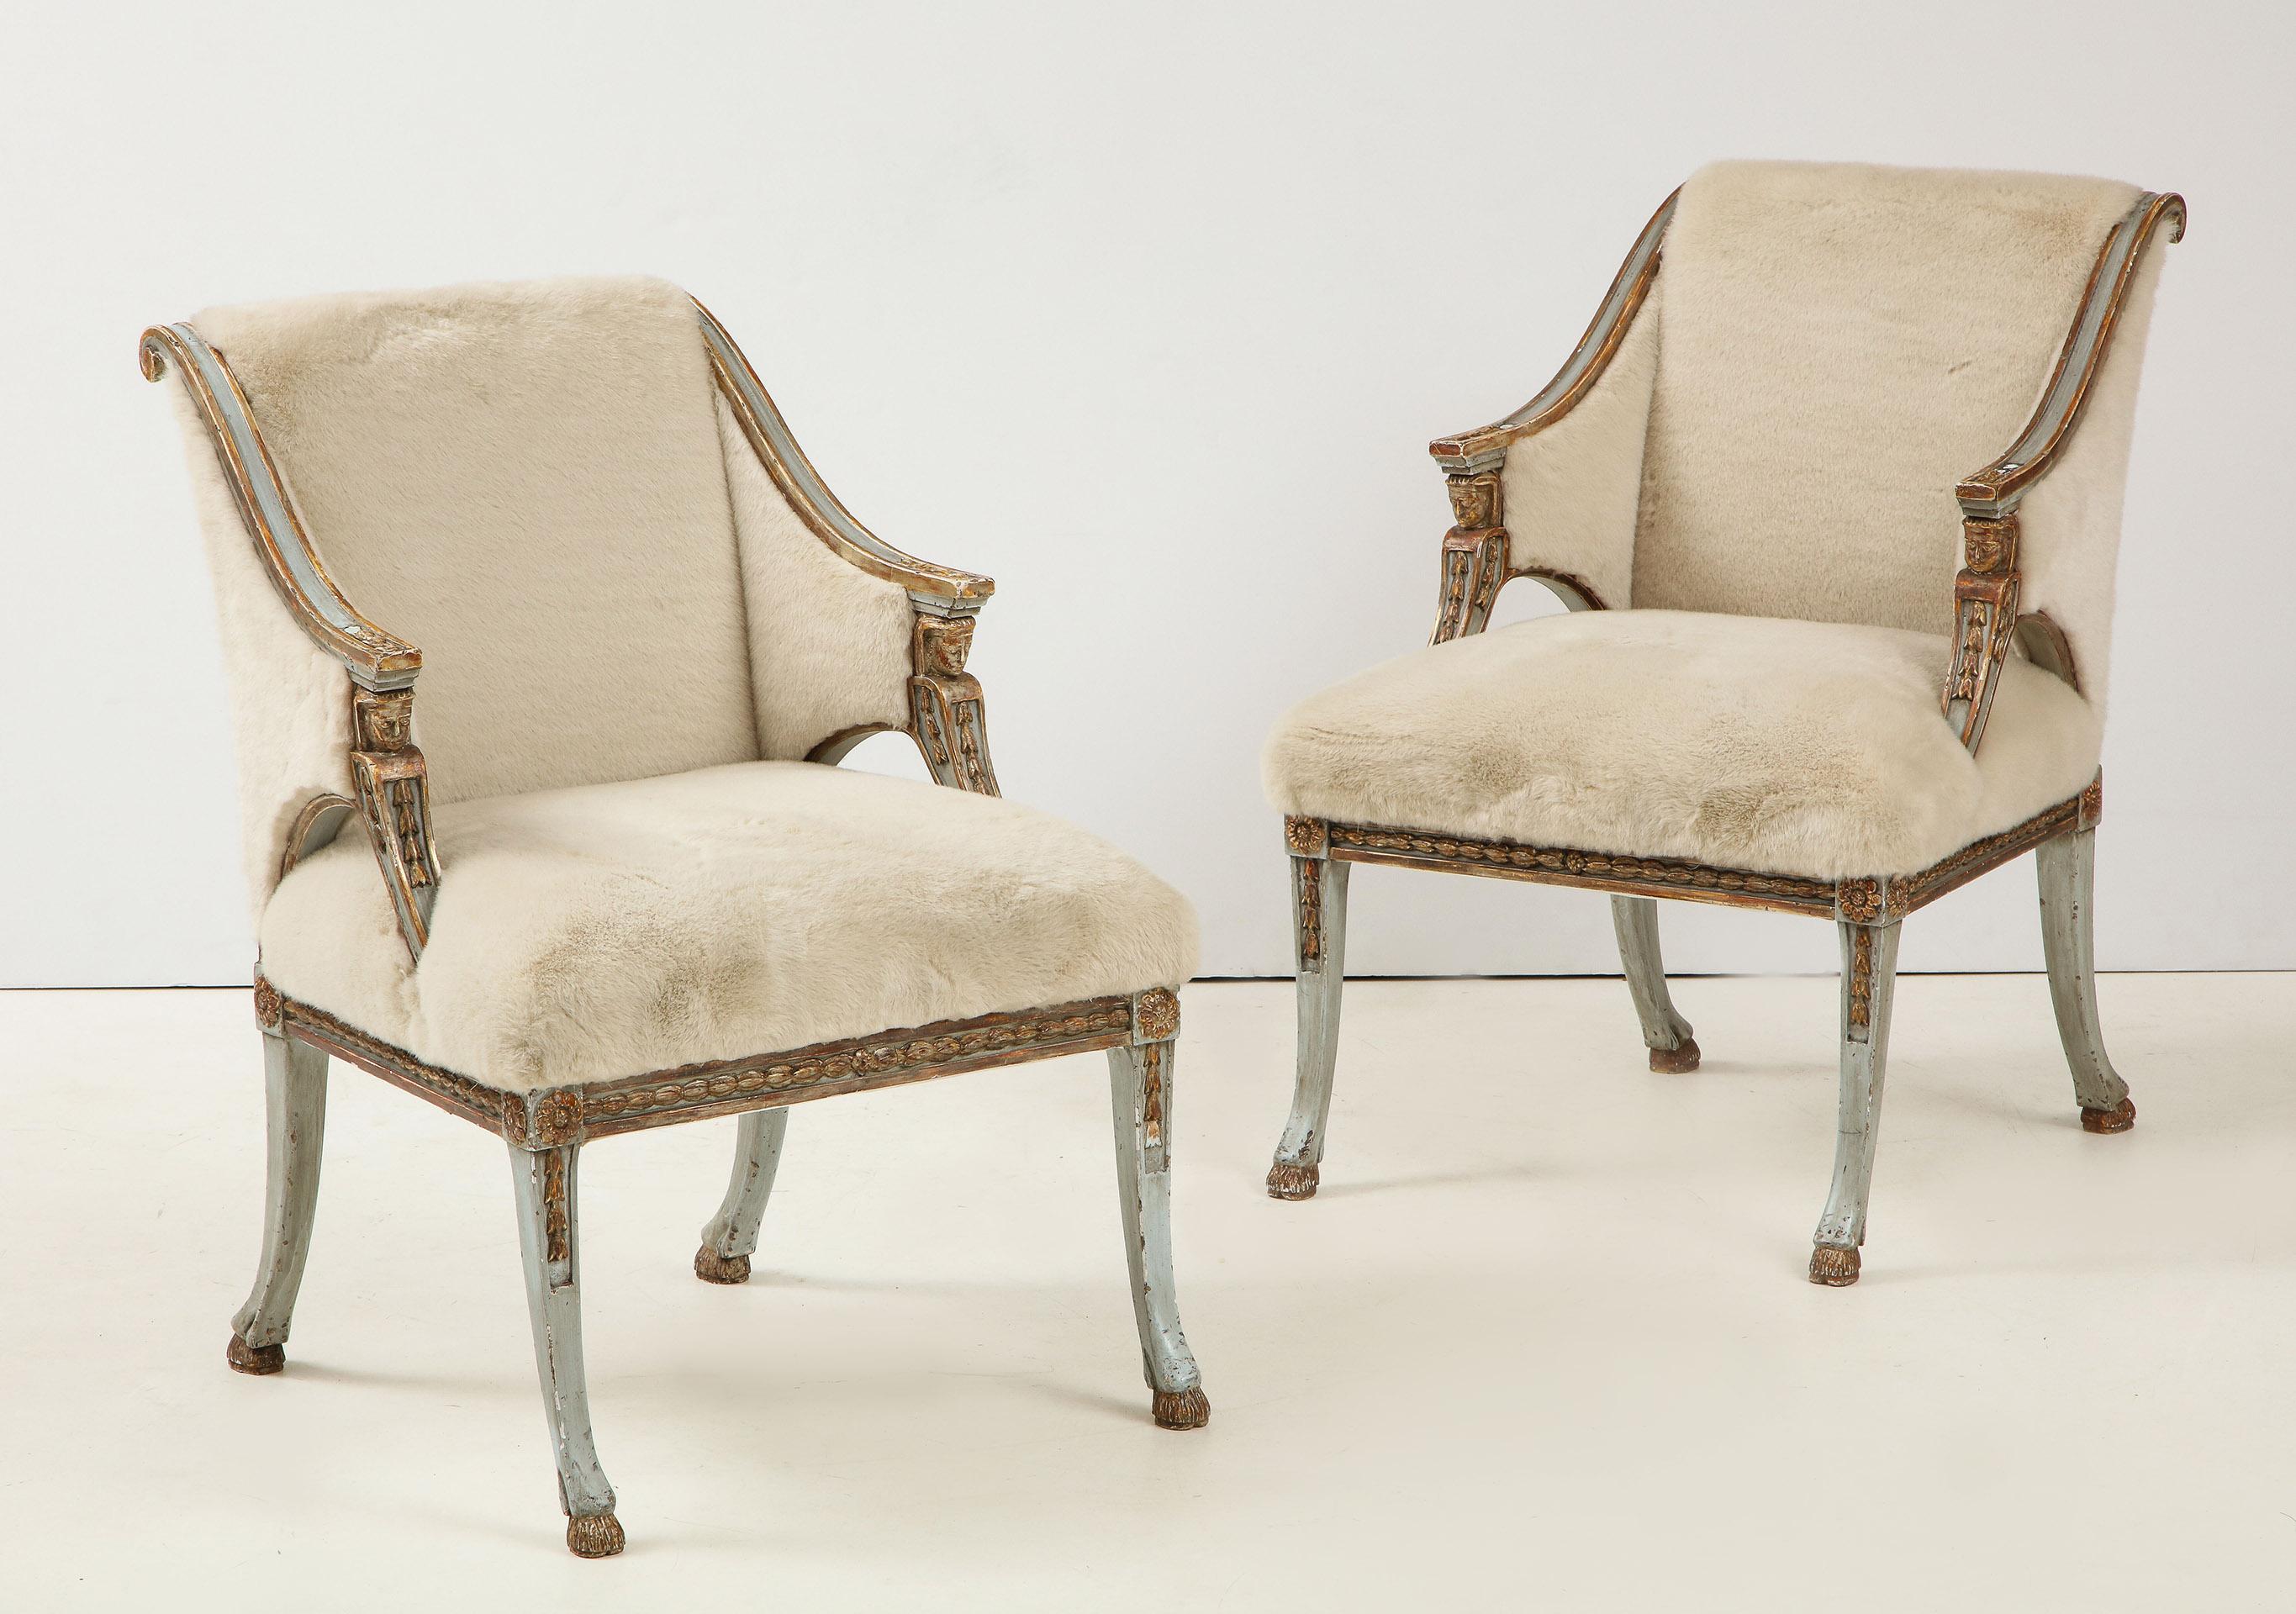 18th Century Pair of Swedish Blue Painted and Silver Gilt Armchairs